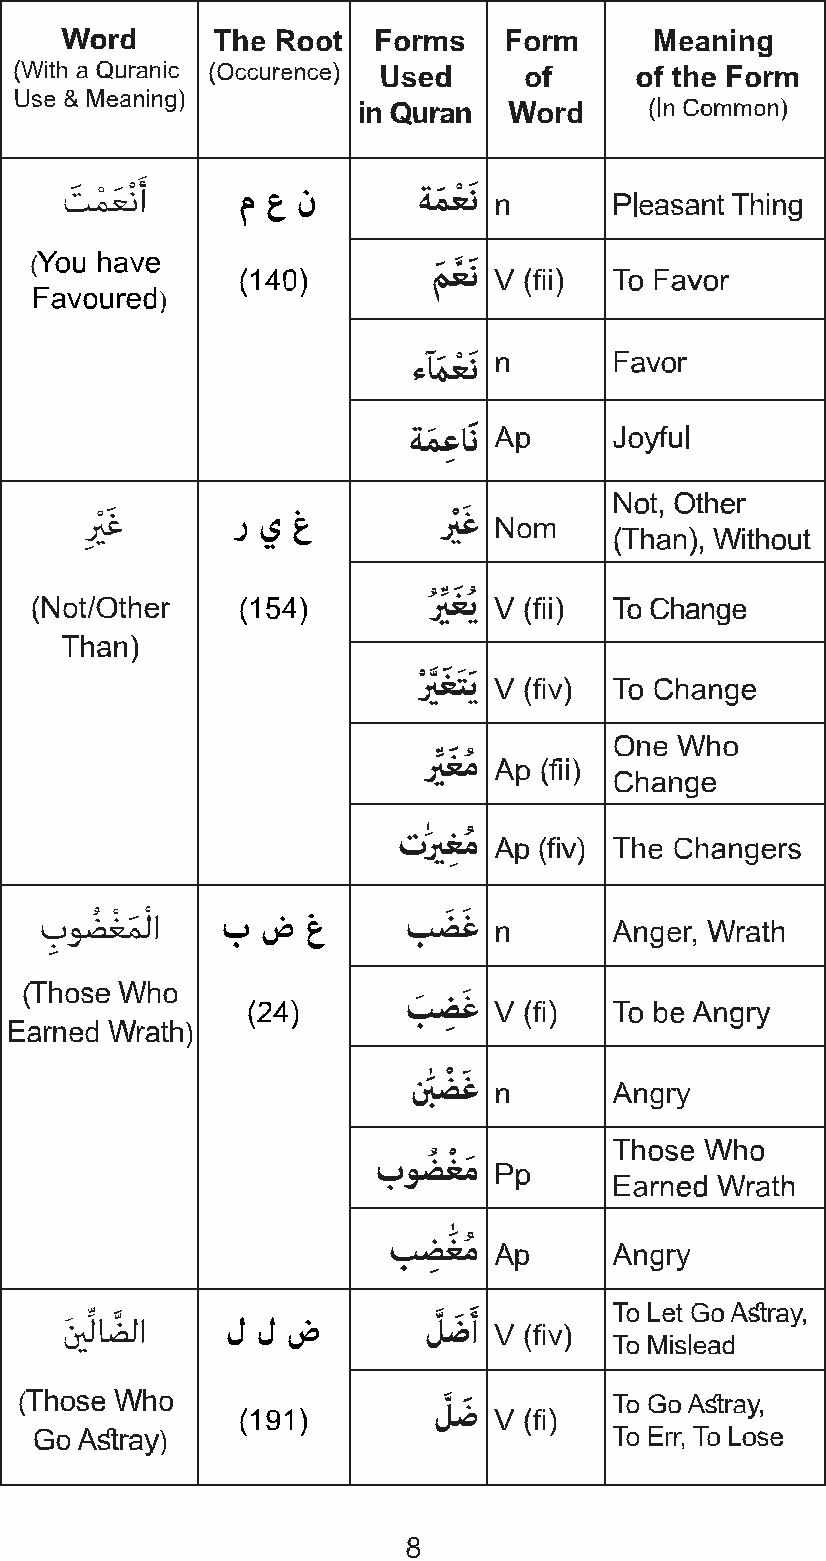 The Golden Words Dictionary of the Holy Quran - The Root Words and Their Forms - photo 10